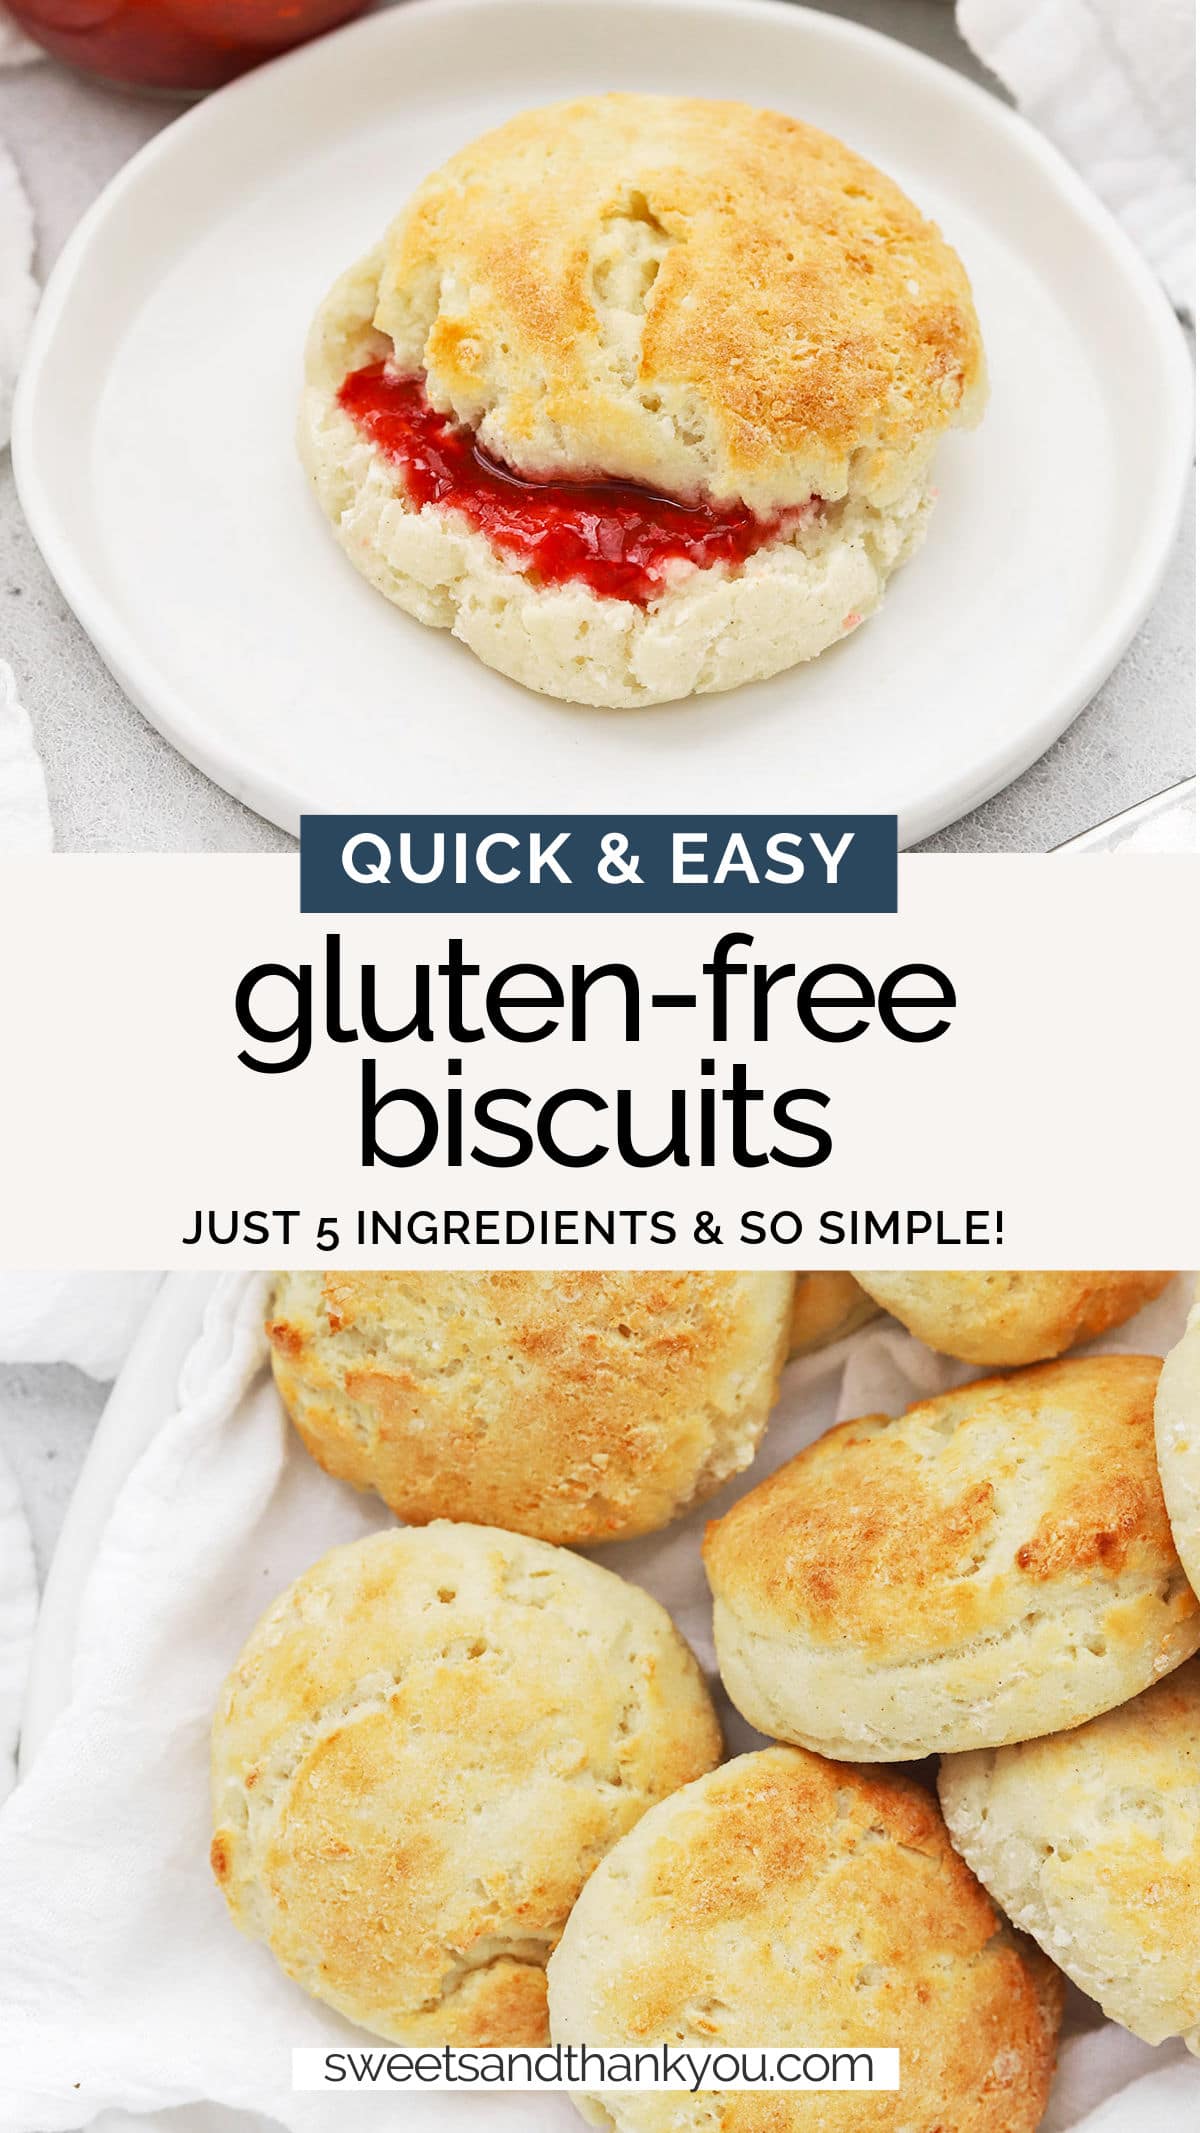 Quick & Easy Gluten-Free Biscuits - These 5-ingredient gluten-free biscuits are simple enough for beginners and are on the table in no time! // Yogurt Biscuits // Gluten Free Drop Biscuits // Easy Gluten Free Biscuit Recipe #biscuits #glutenfree #glutenfreebaking #dropbiscuits